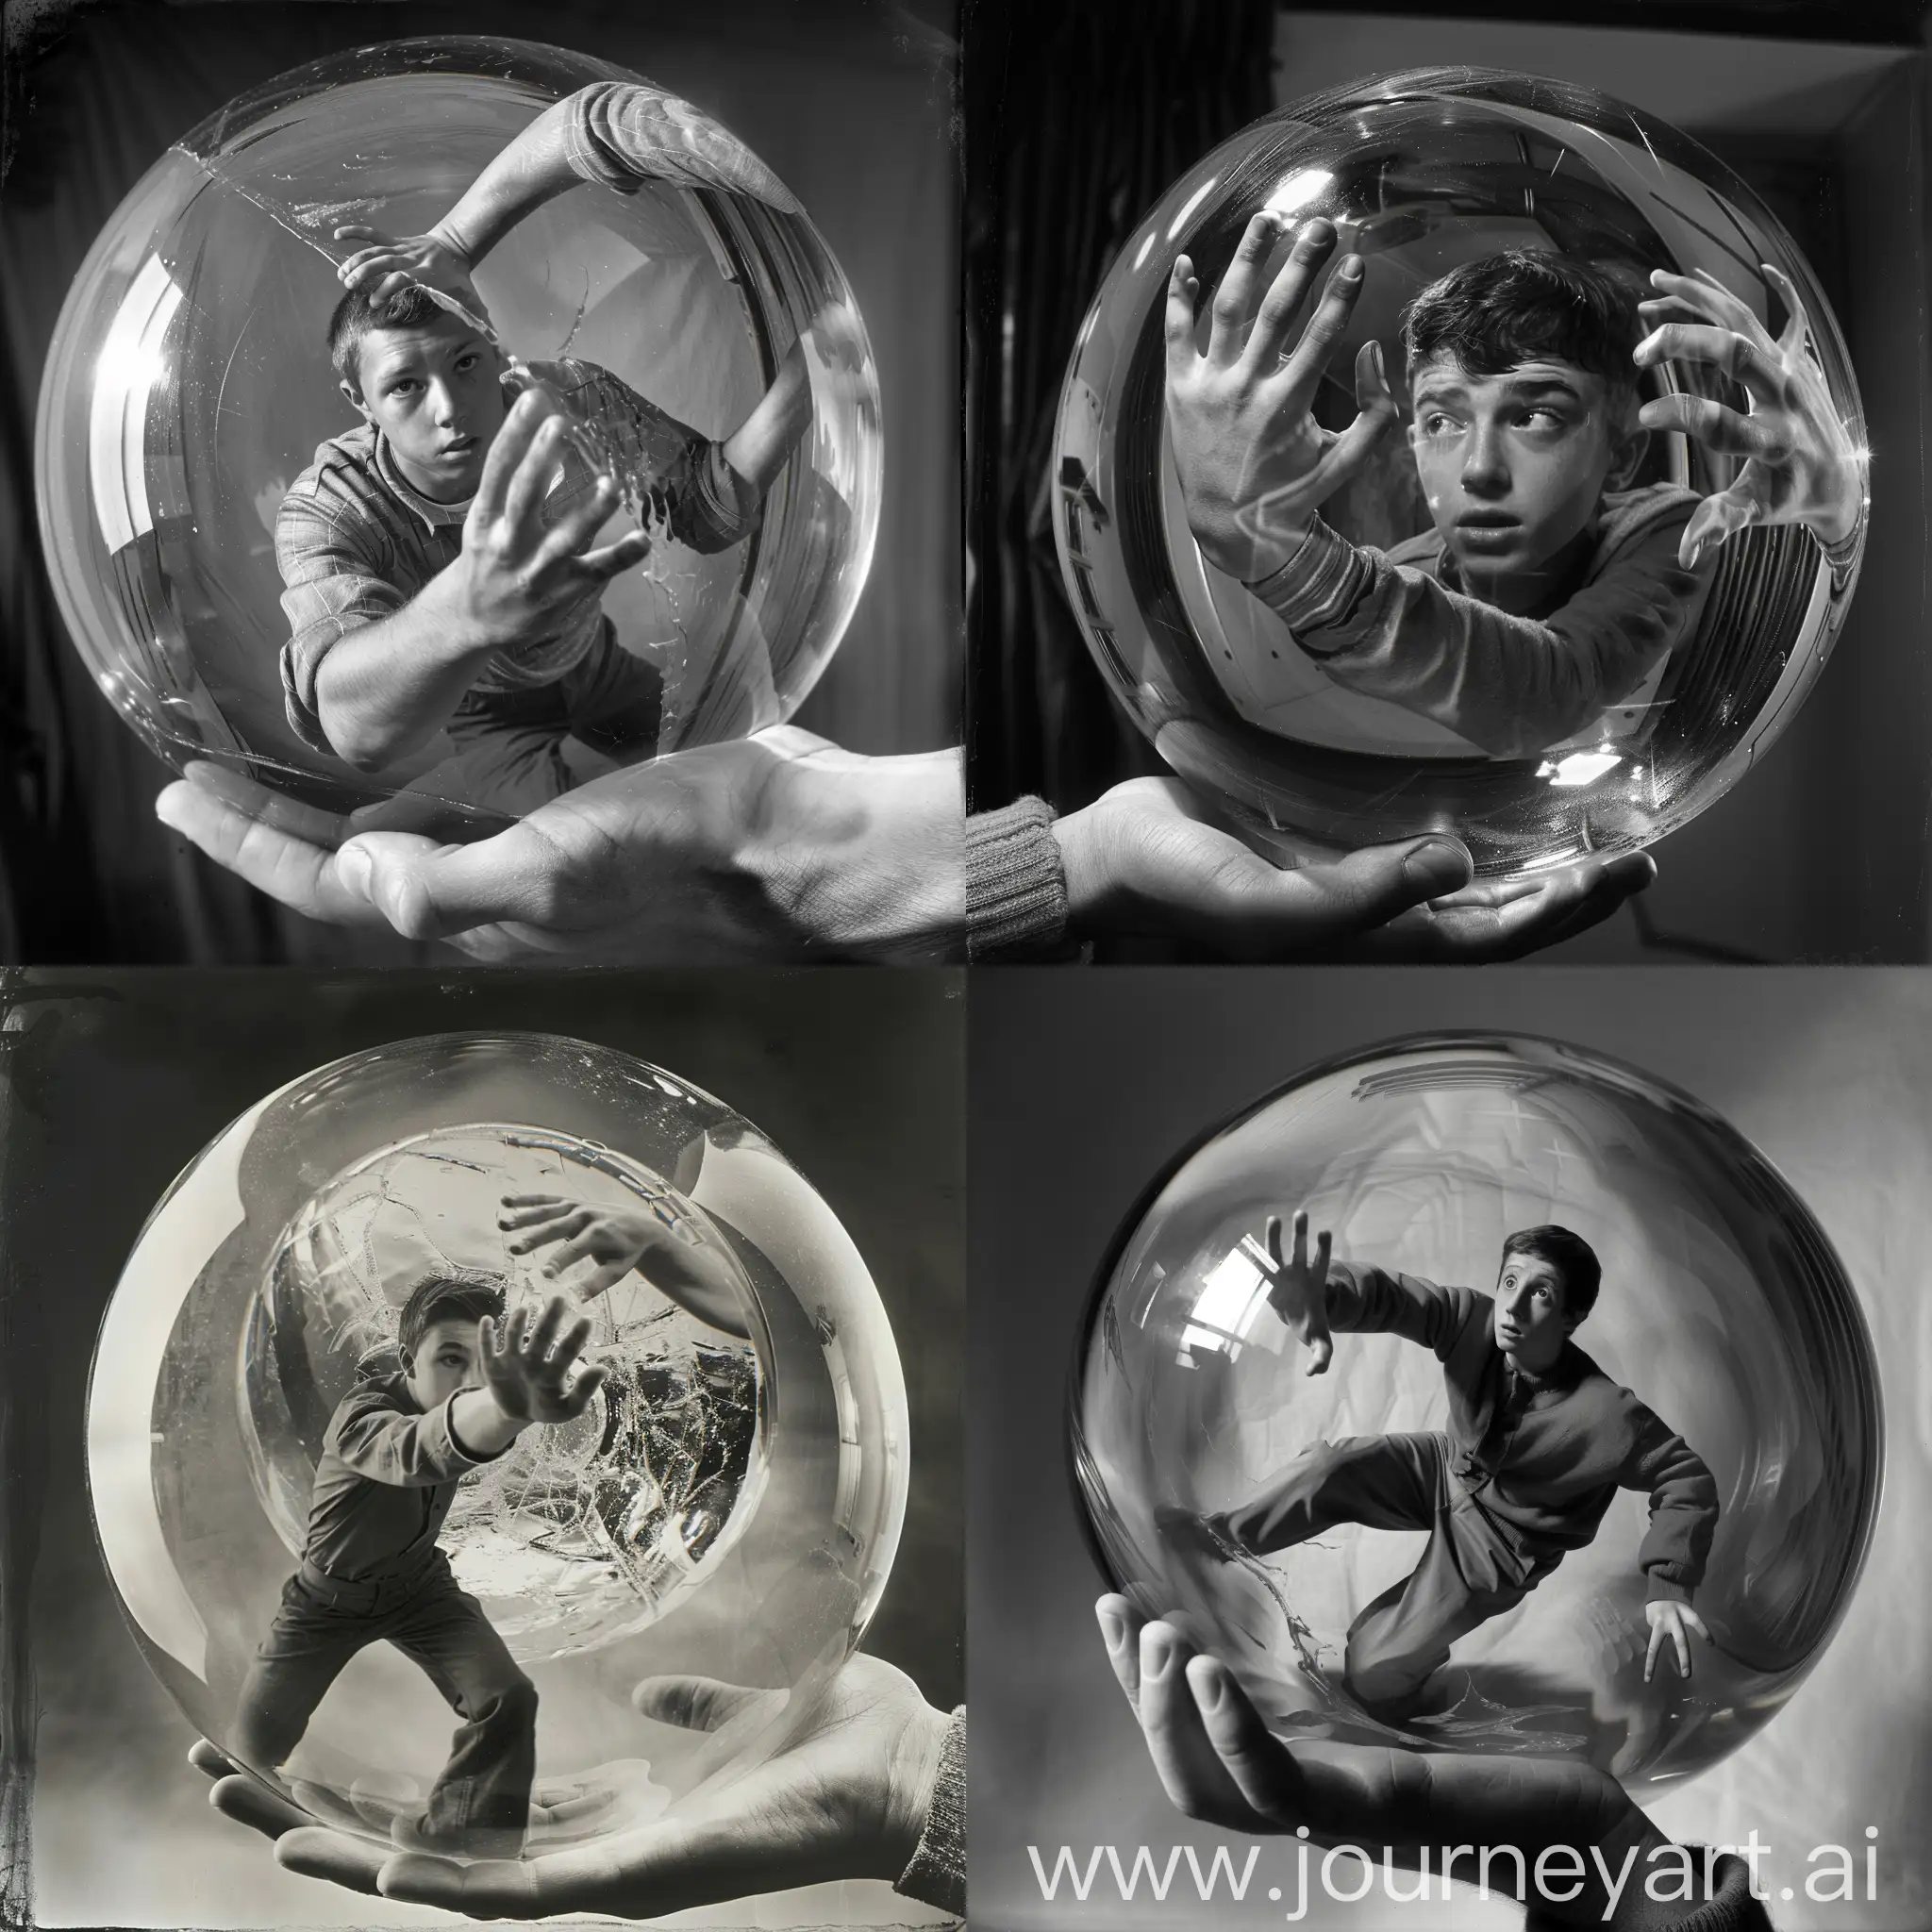 Escher style. Hand holding a big ball of glass. In the ball  a young male pushing his hands against the glass